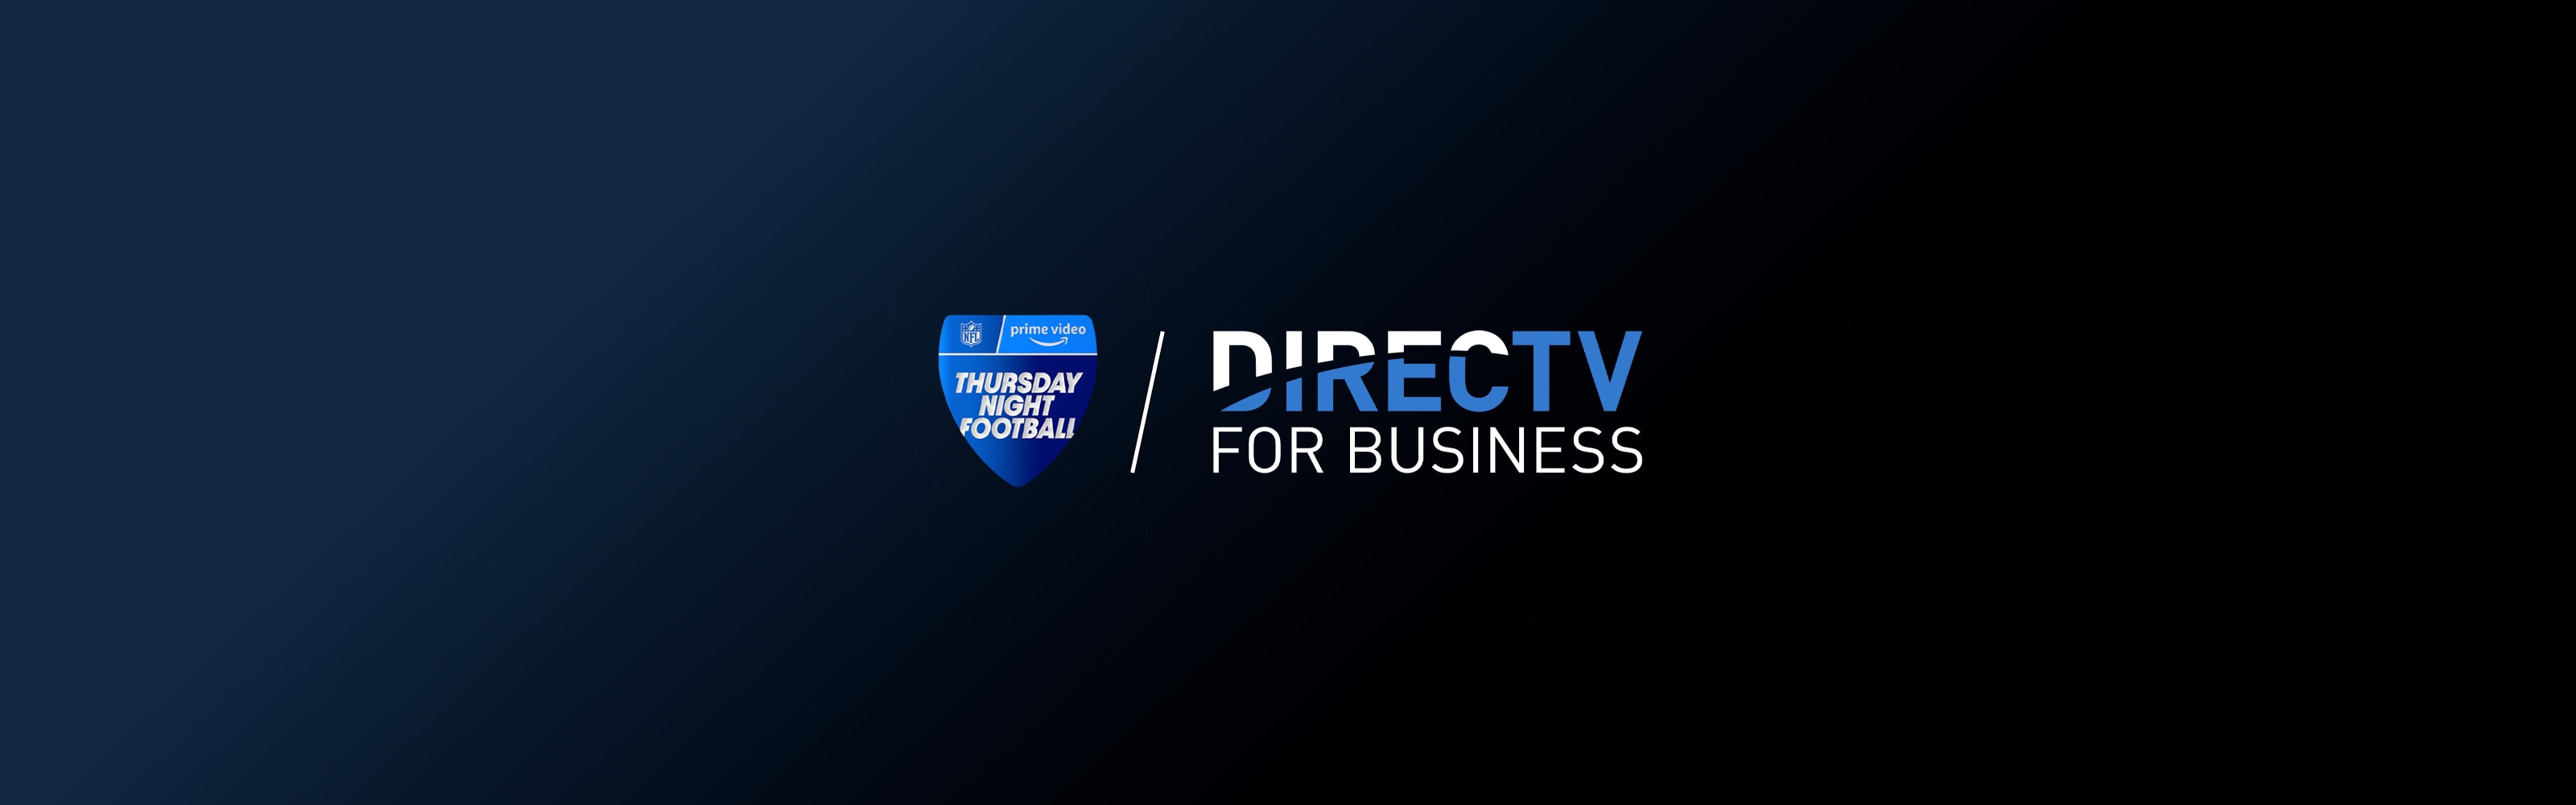 what channel is the nfl game on tonight directv